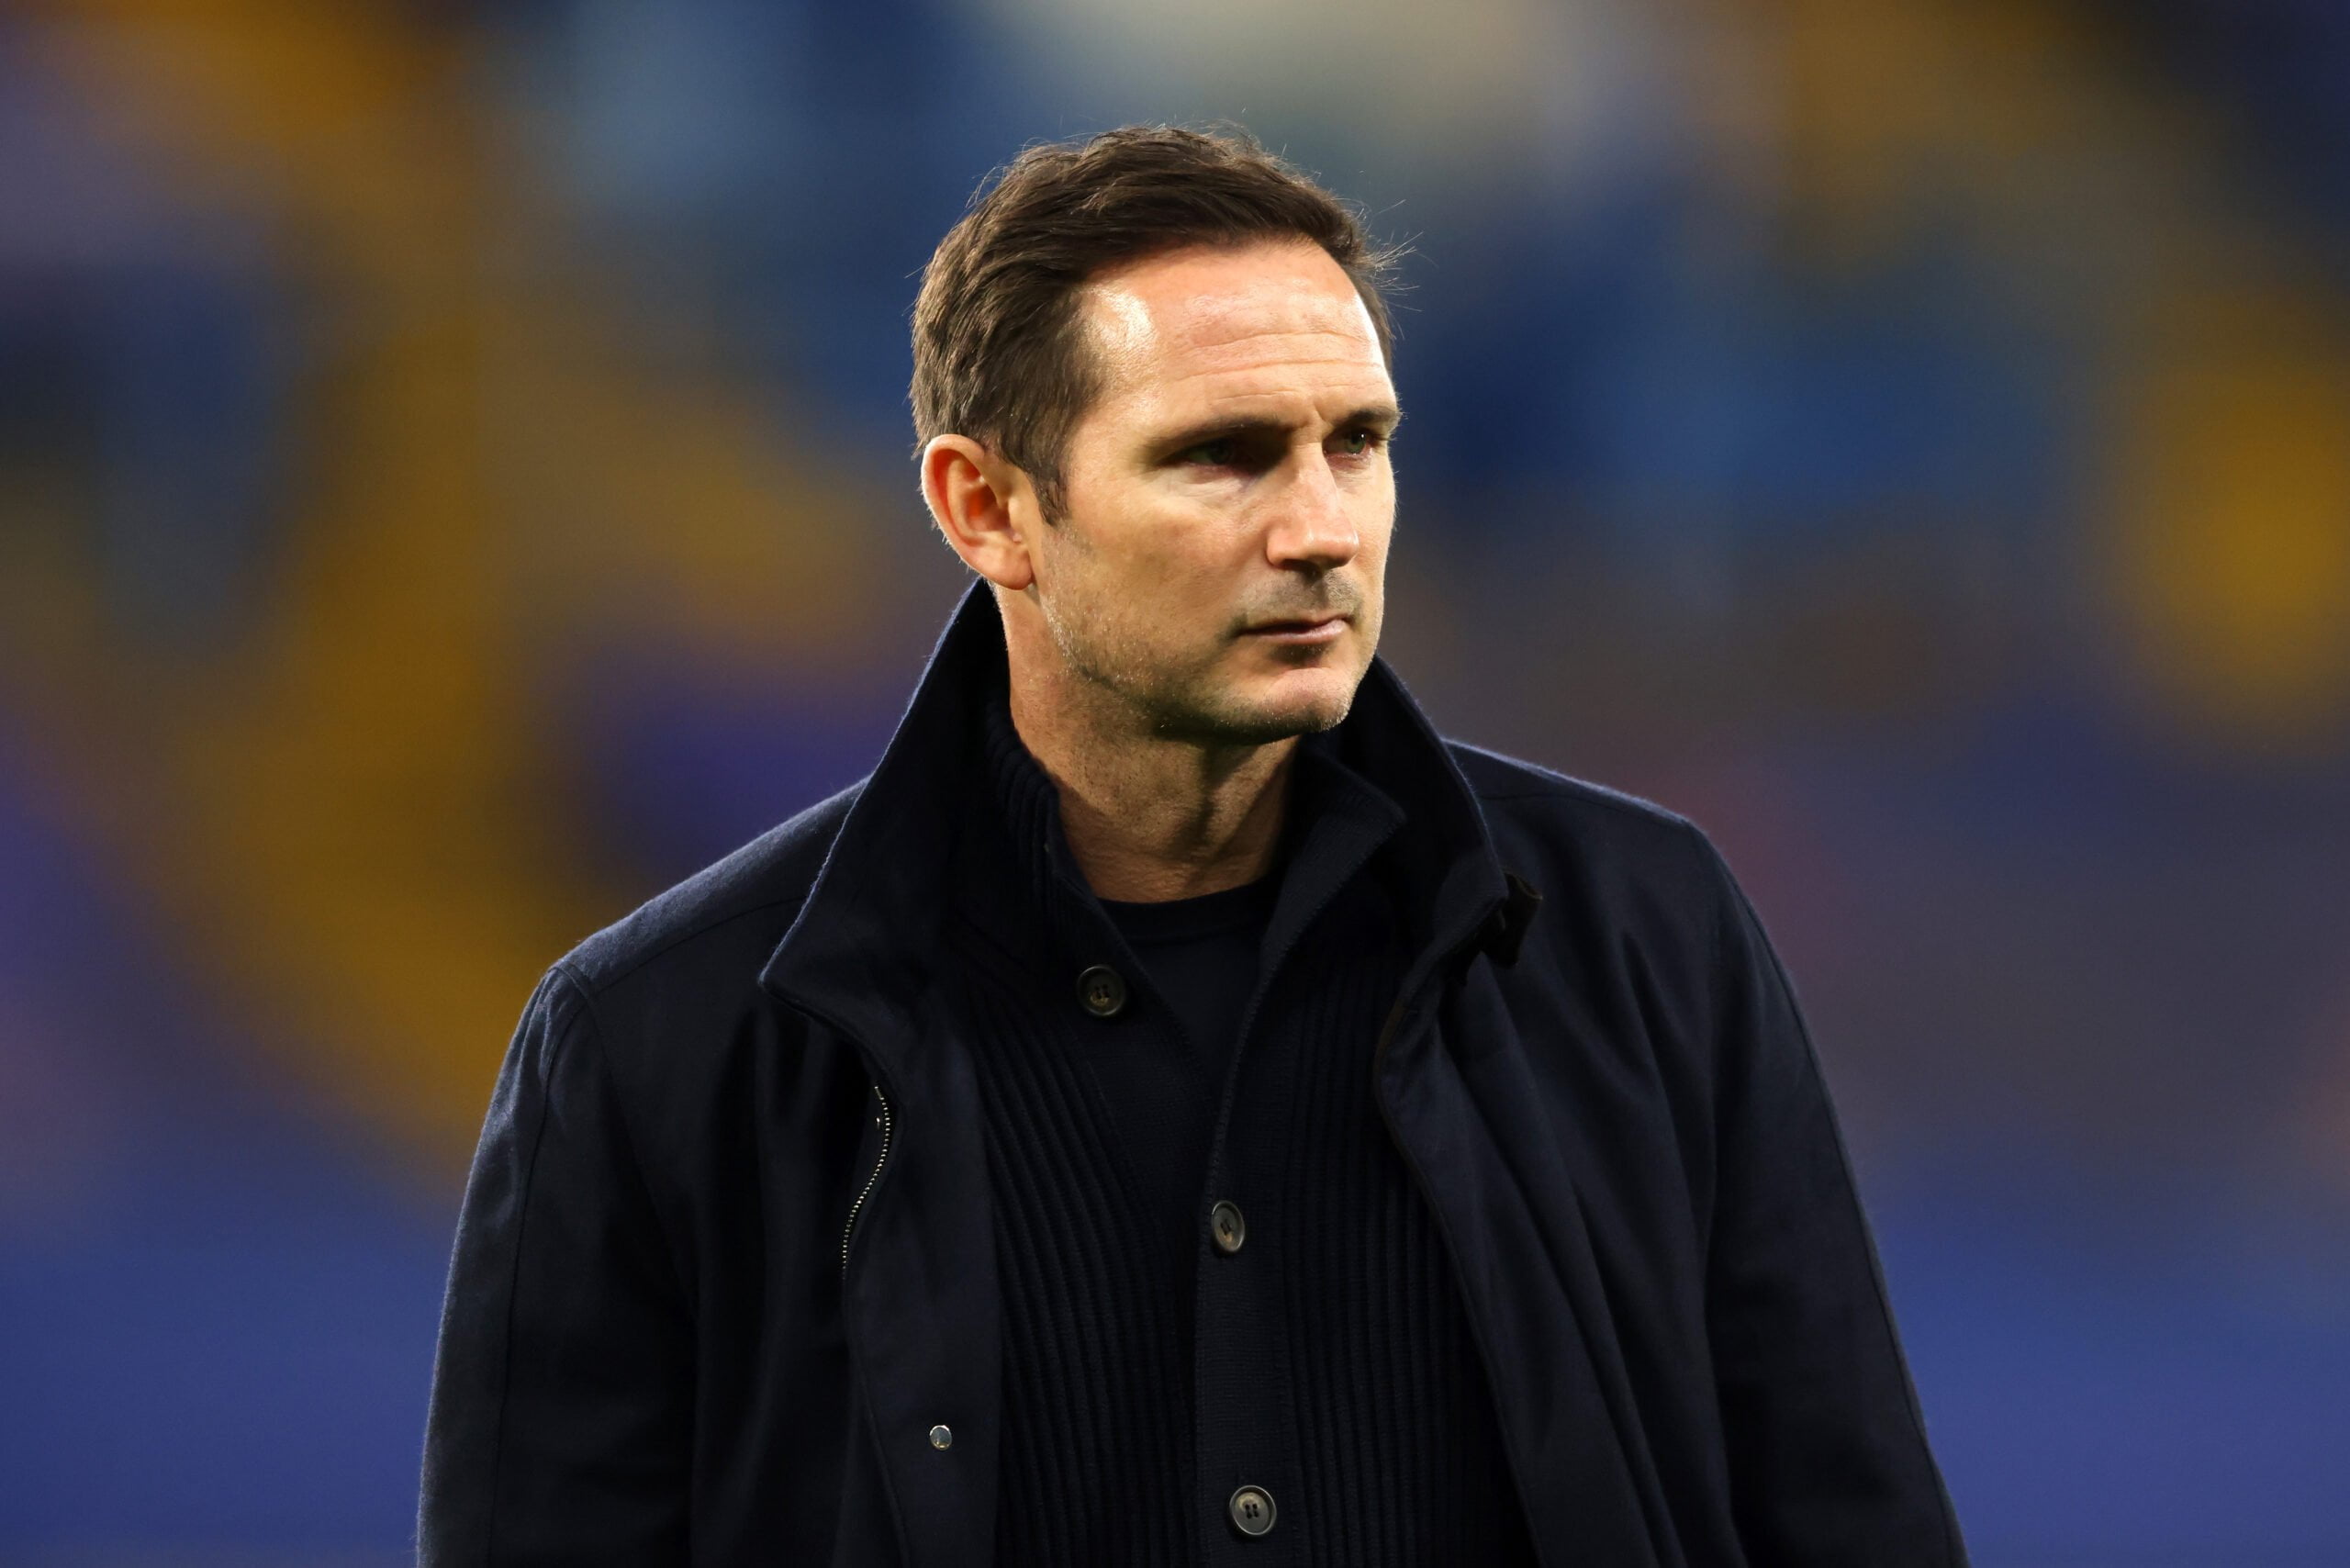 Frank Lampard, manager d'Everton